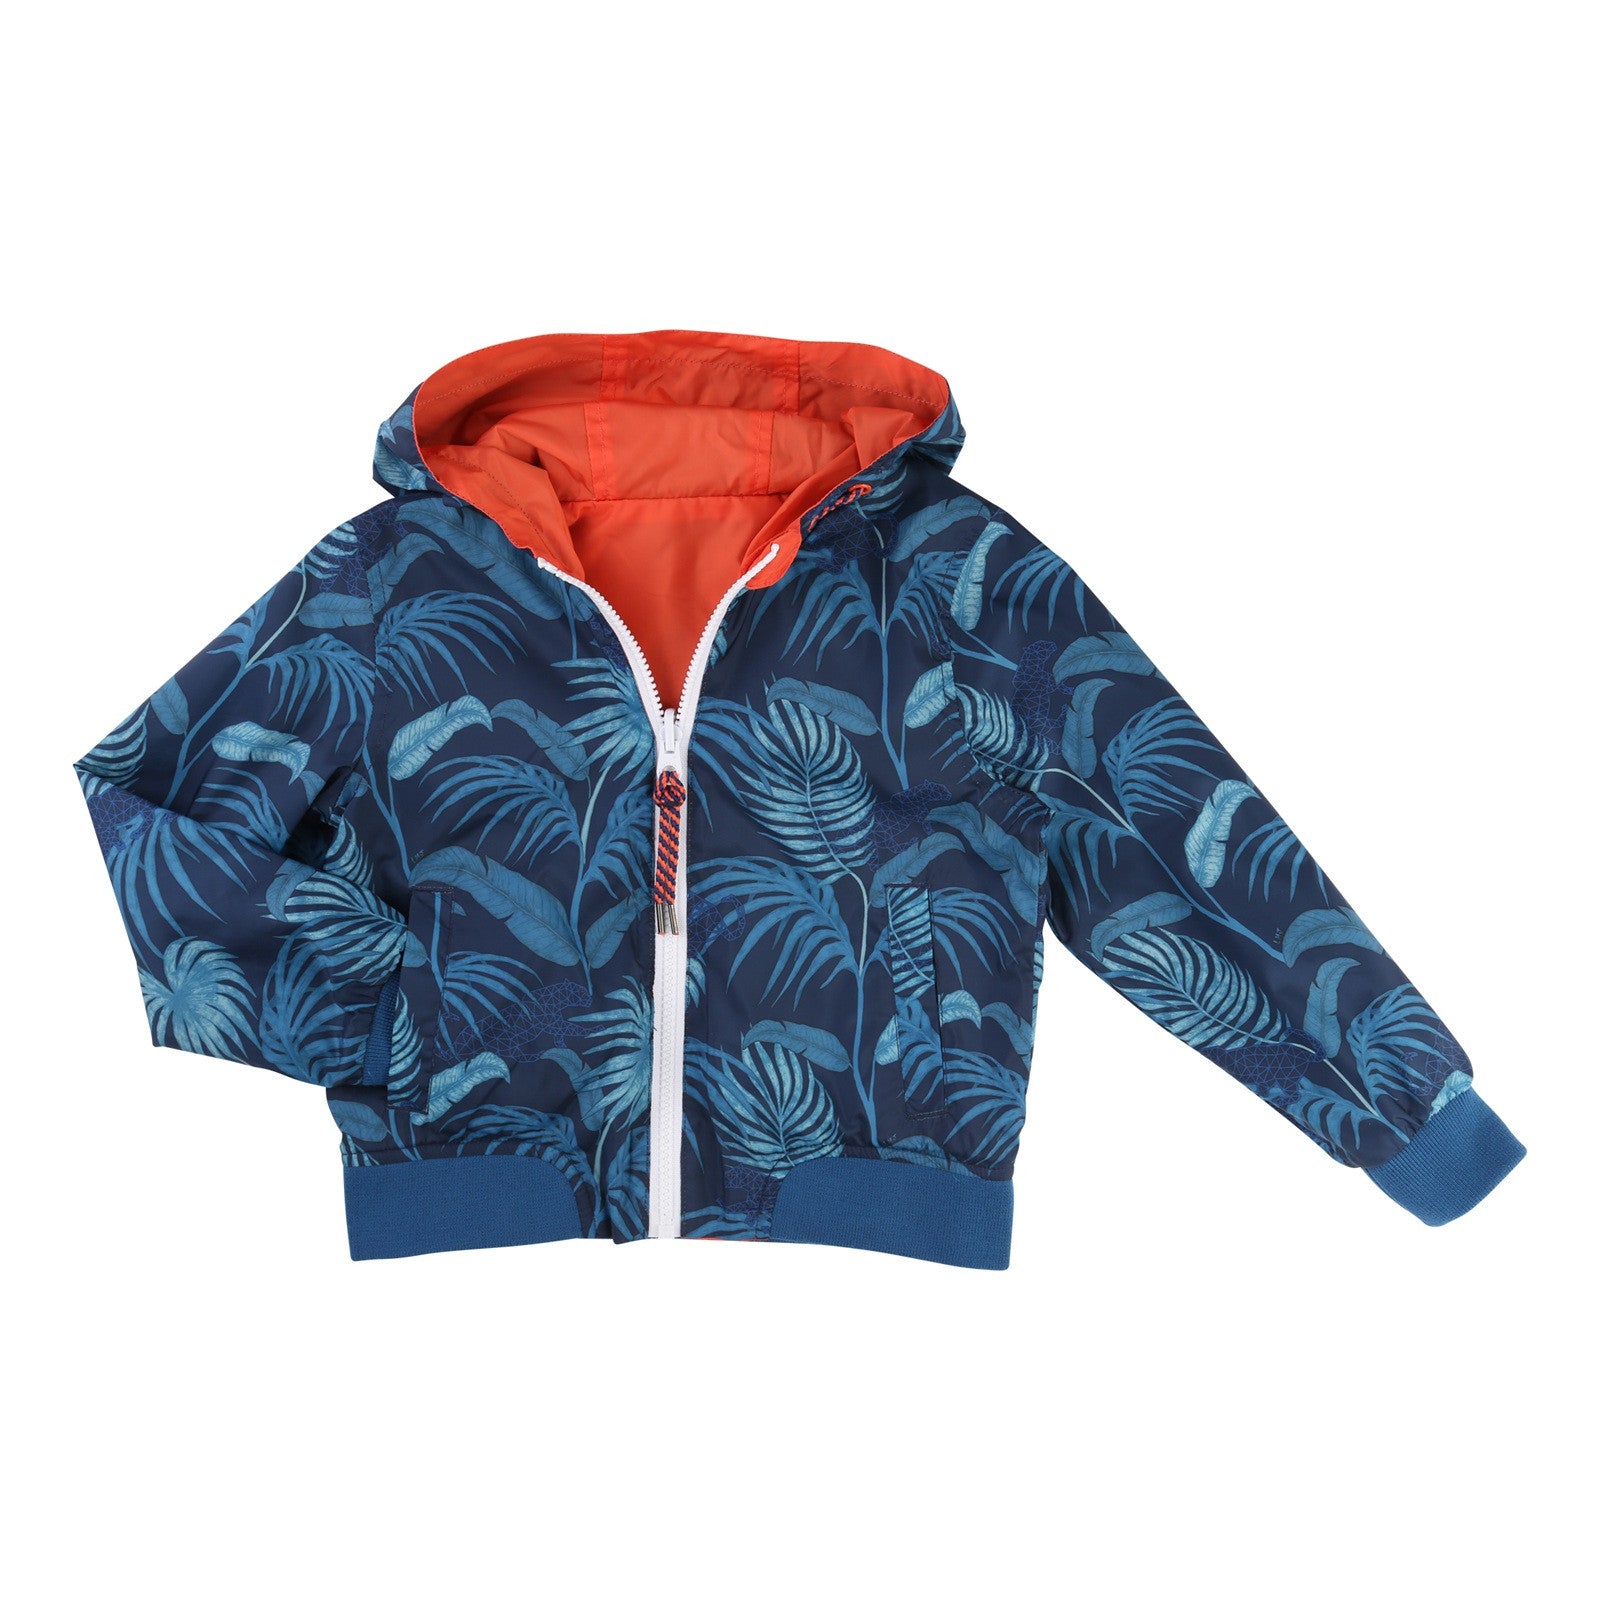 Baby Boys Red&Blue Printed Reversibe Zip-up Hooded Jacket - CÉMAROSE | Children's Fashion Store - 2